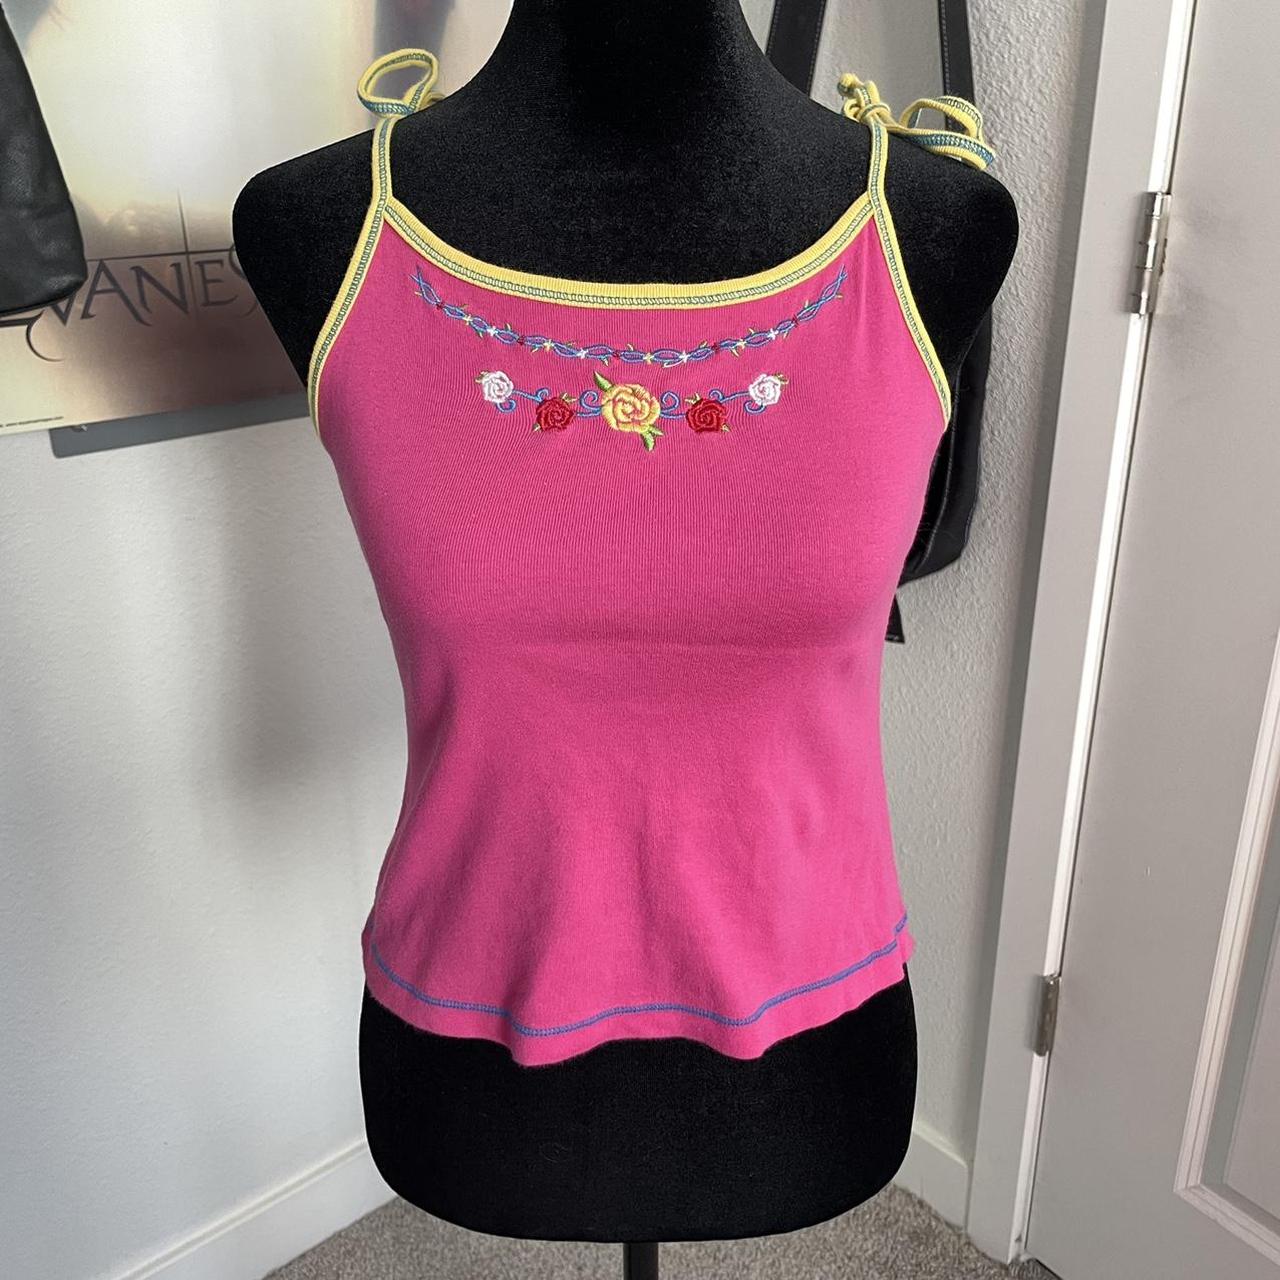 L.e.i. Women's Pink and Yellow Vest | Depop